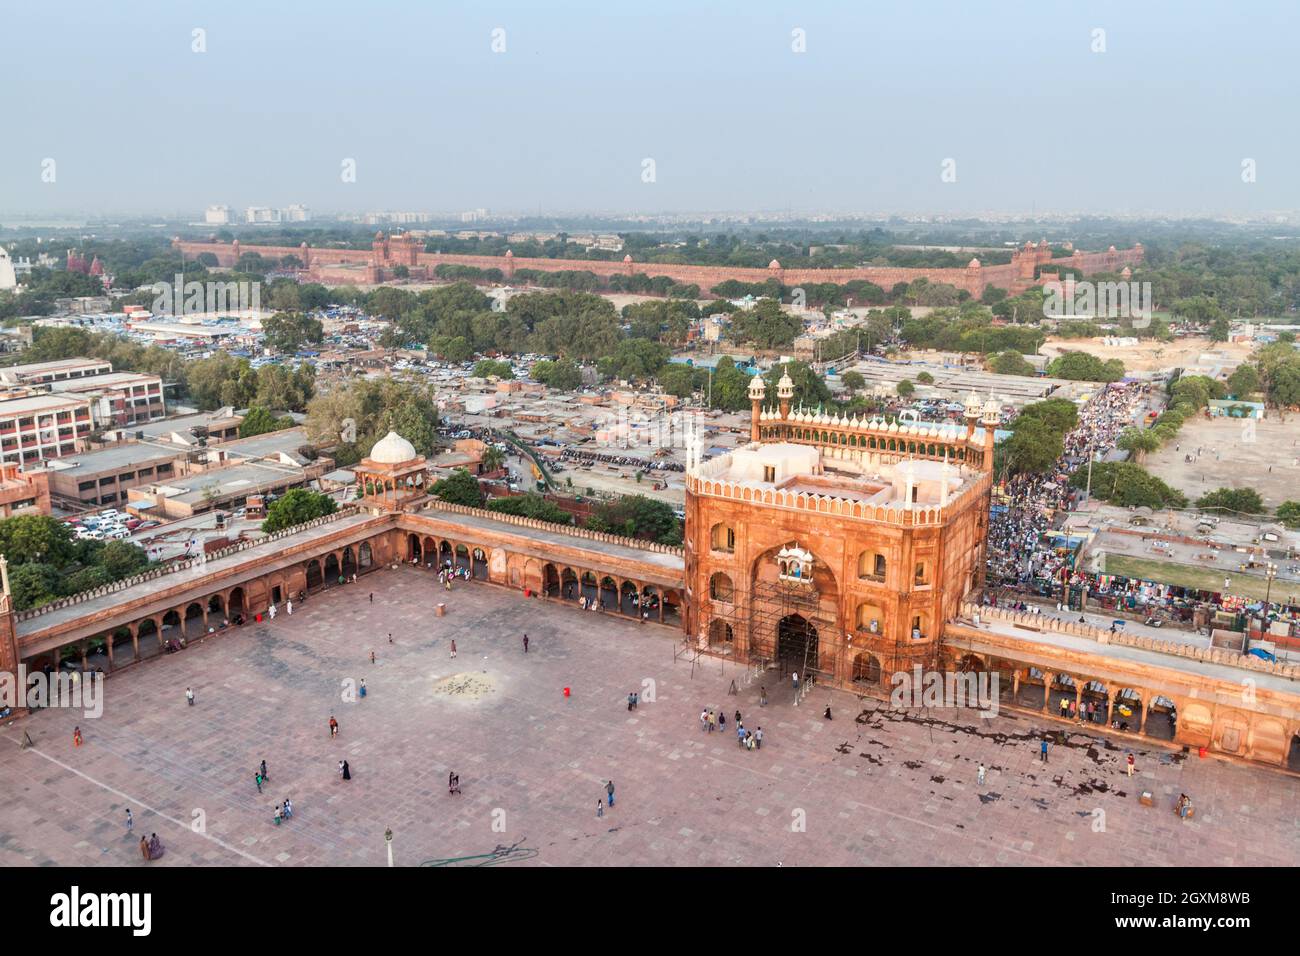 DELHI, INDIA - OCTOBER 22, 2016: Courtyard of Jama Masjid mosque in the center of Delhi, India. Red Fort in the background. Stock Photo